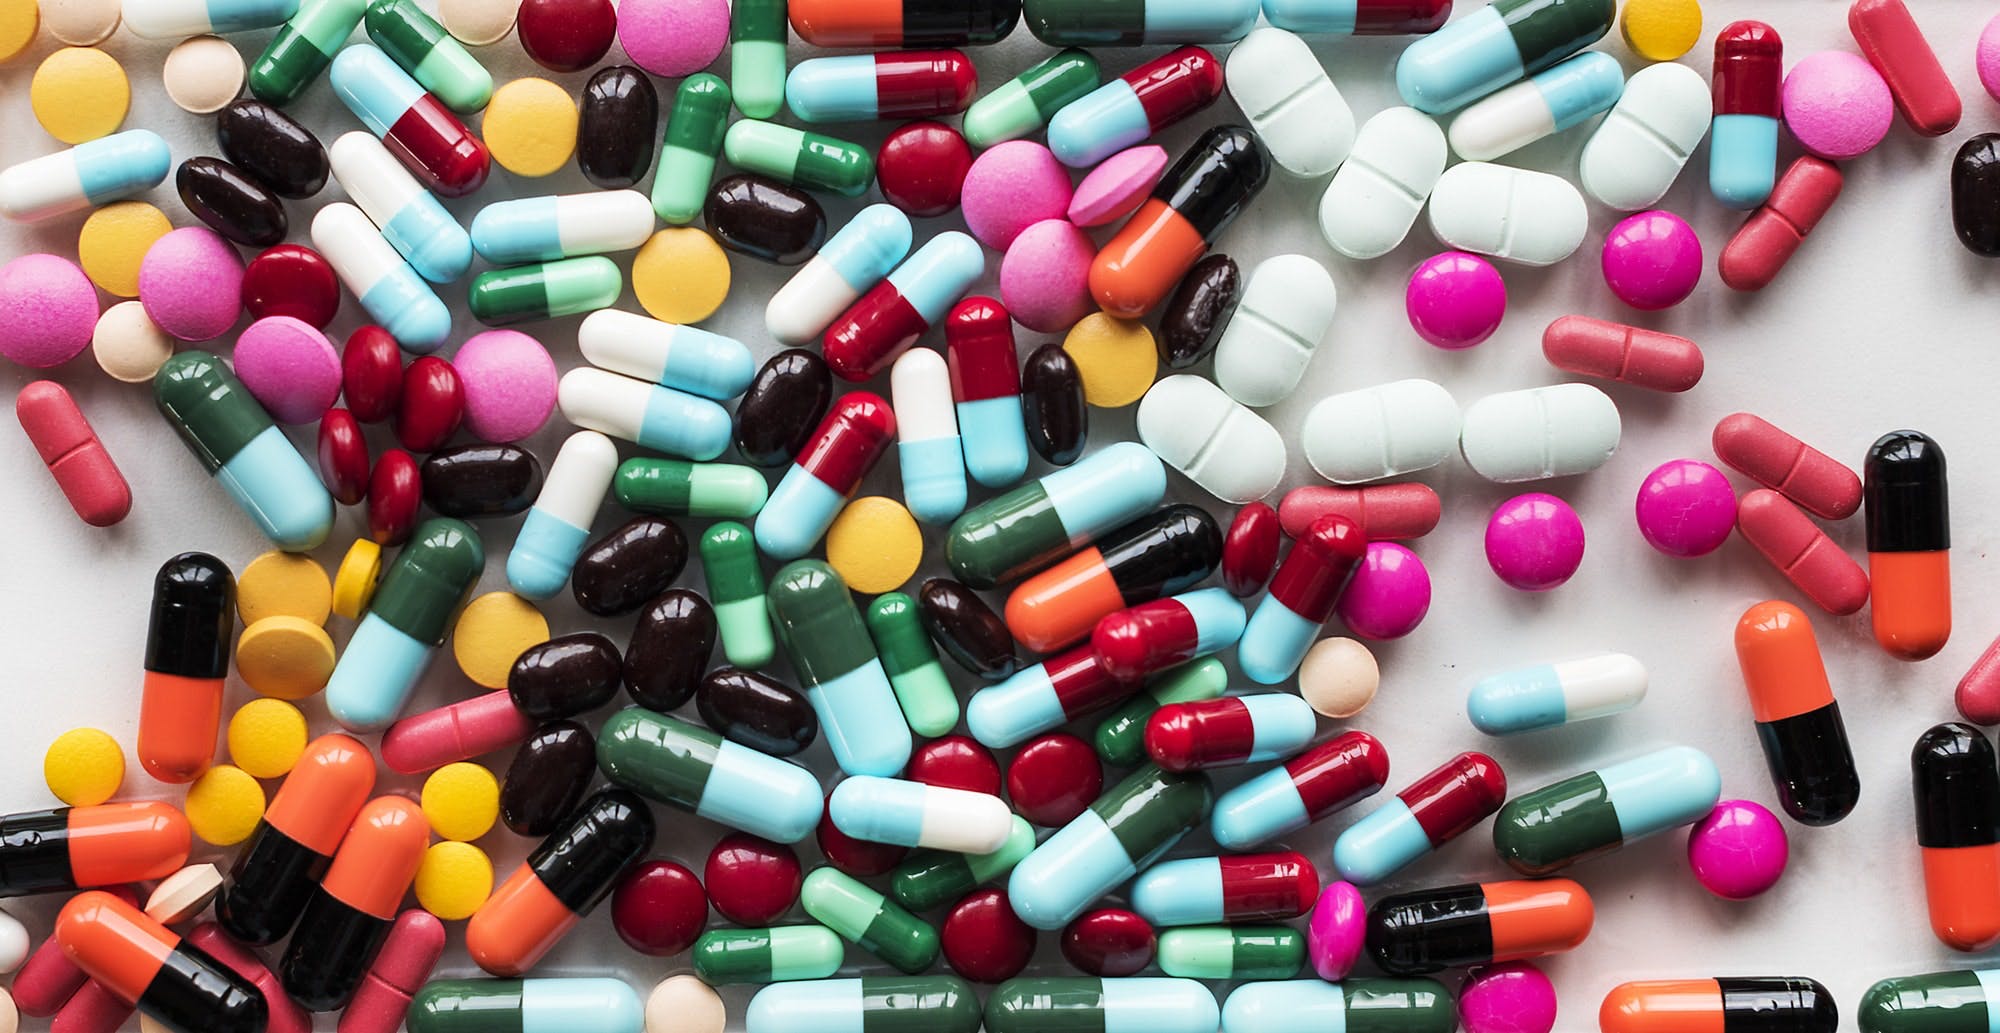 CMMS For Pharmaceuticals: What You Need To Know